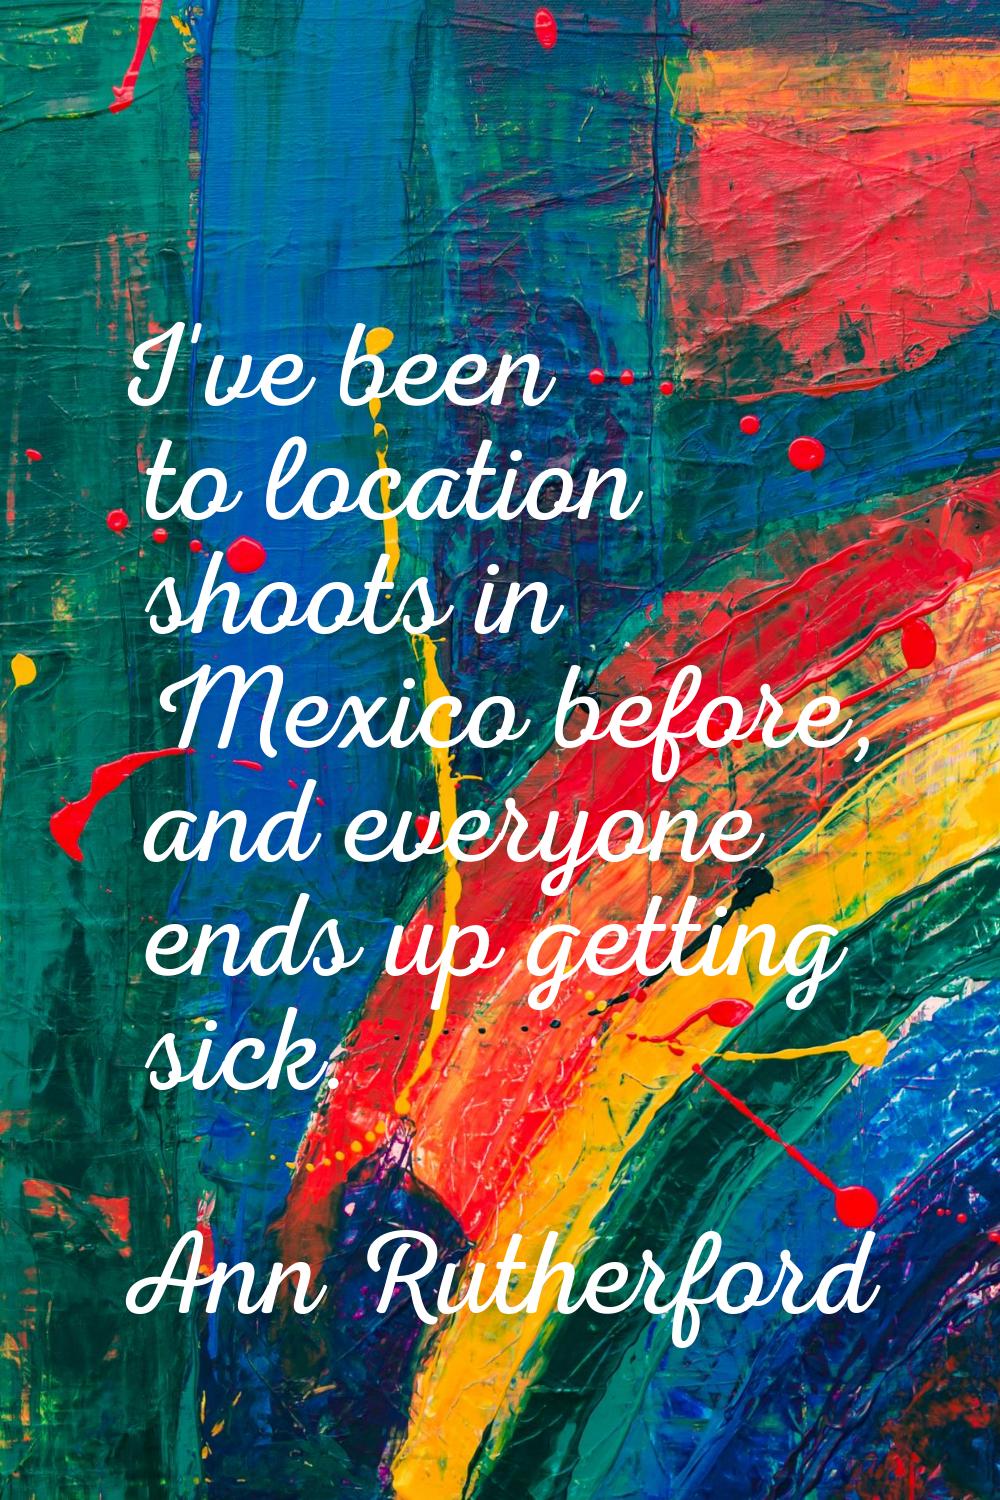 I've been to location shoots in Mexico before, and everyone ends up getting sick.